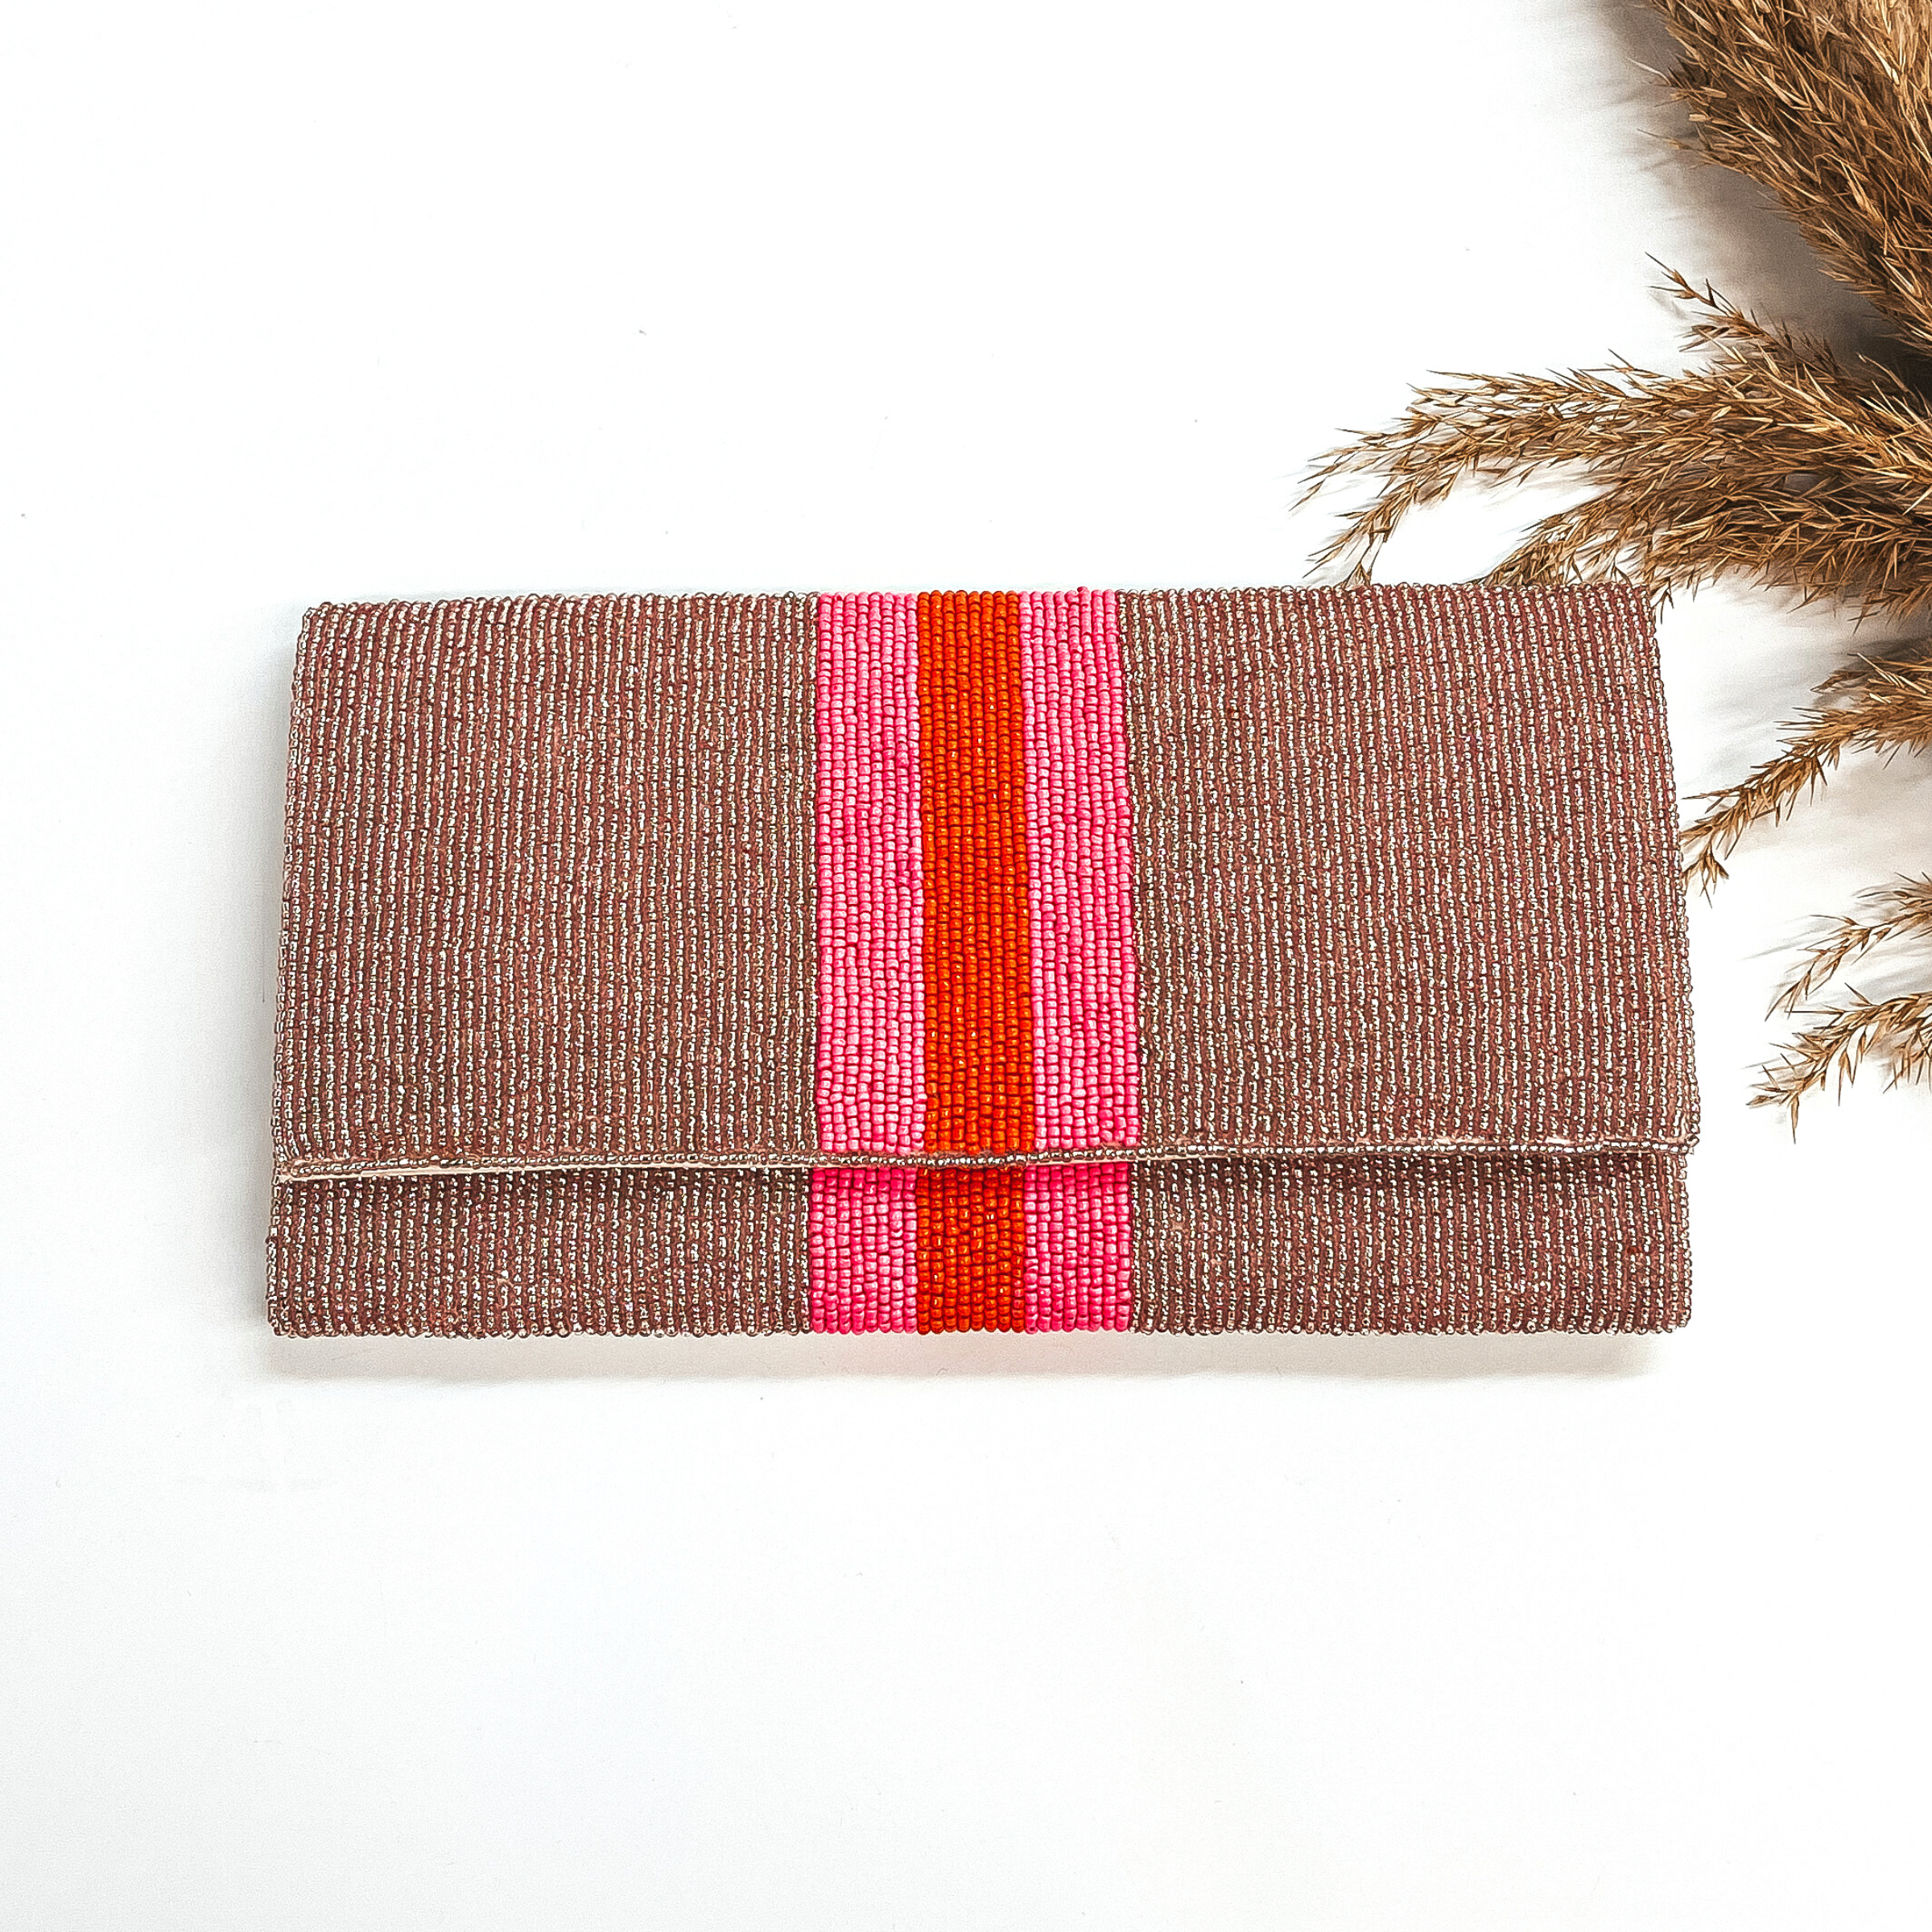 This is a seedbeaded clutch purse in rose gold with  three stripes in the middle, two hot pink and one orange line in the middle. This bag  is taken laying on a white background with a brown plant in the side as decor.